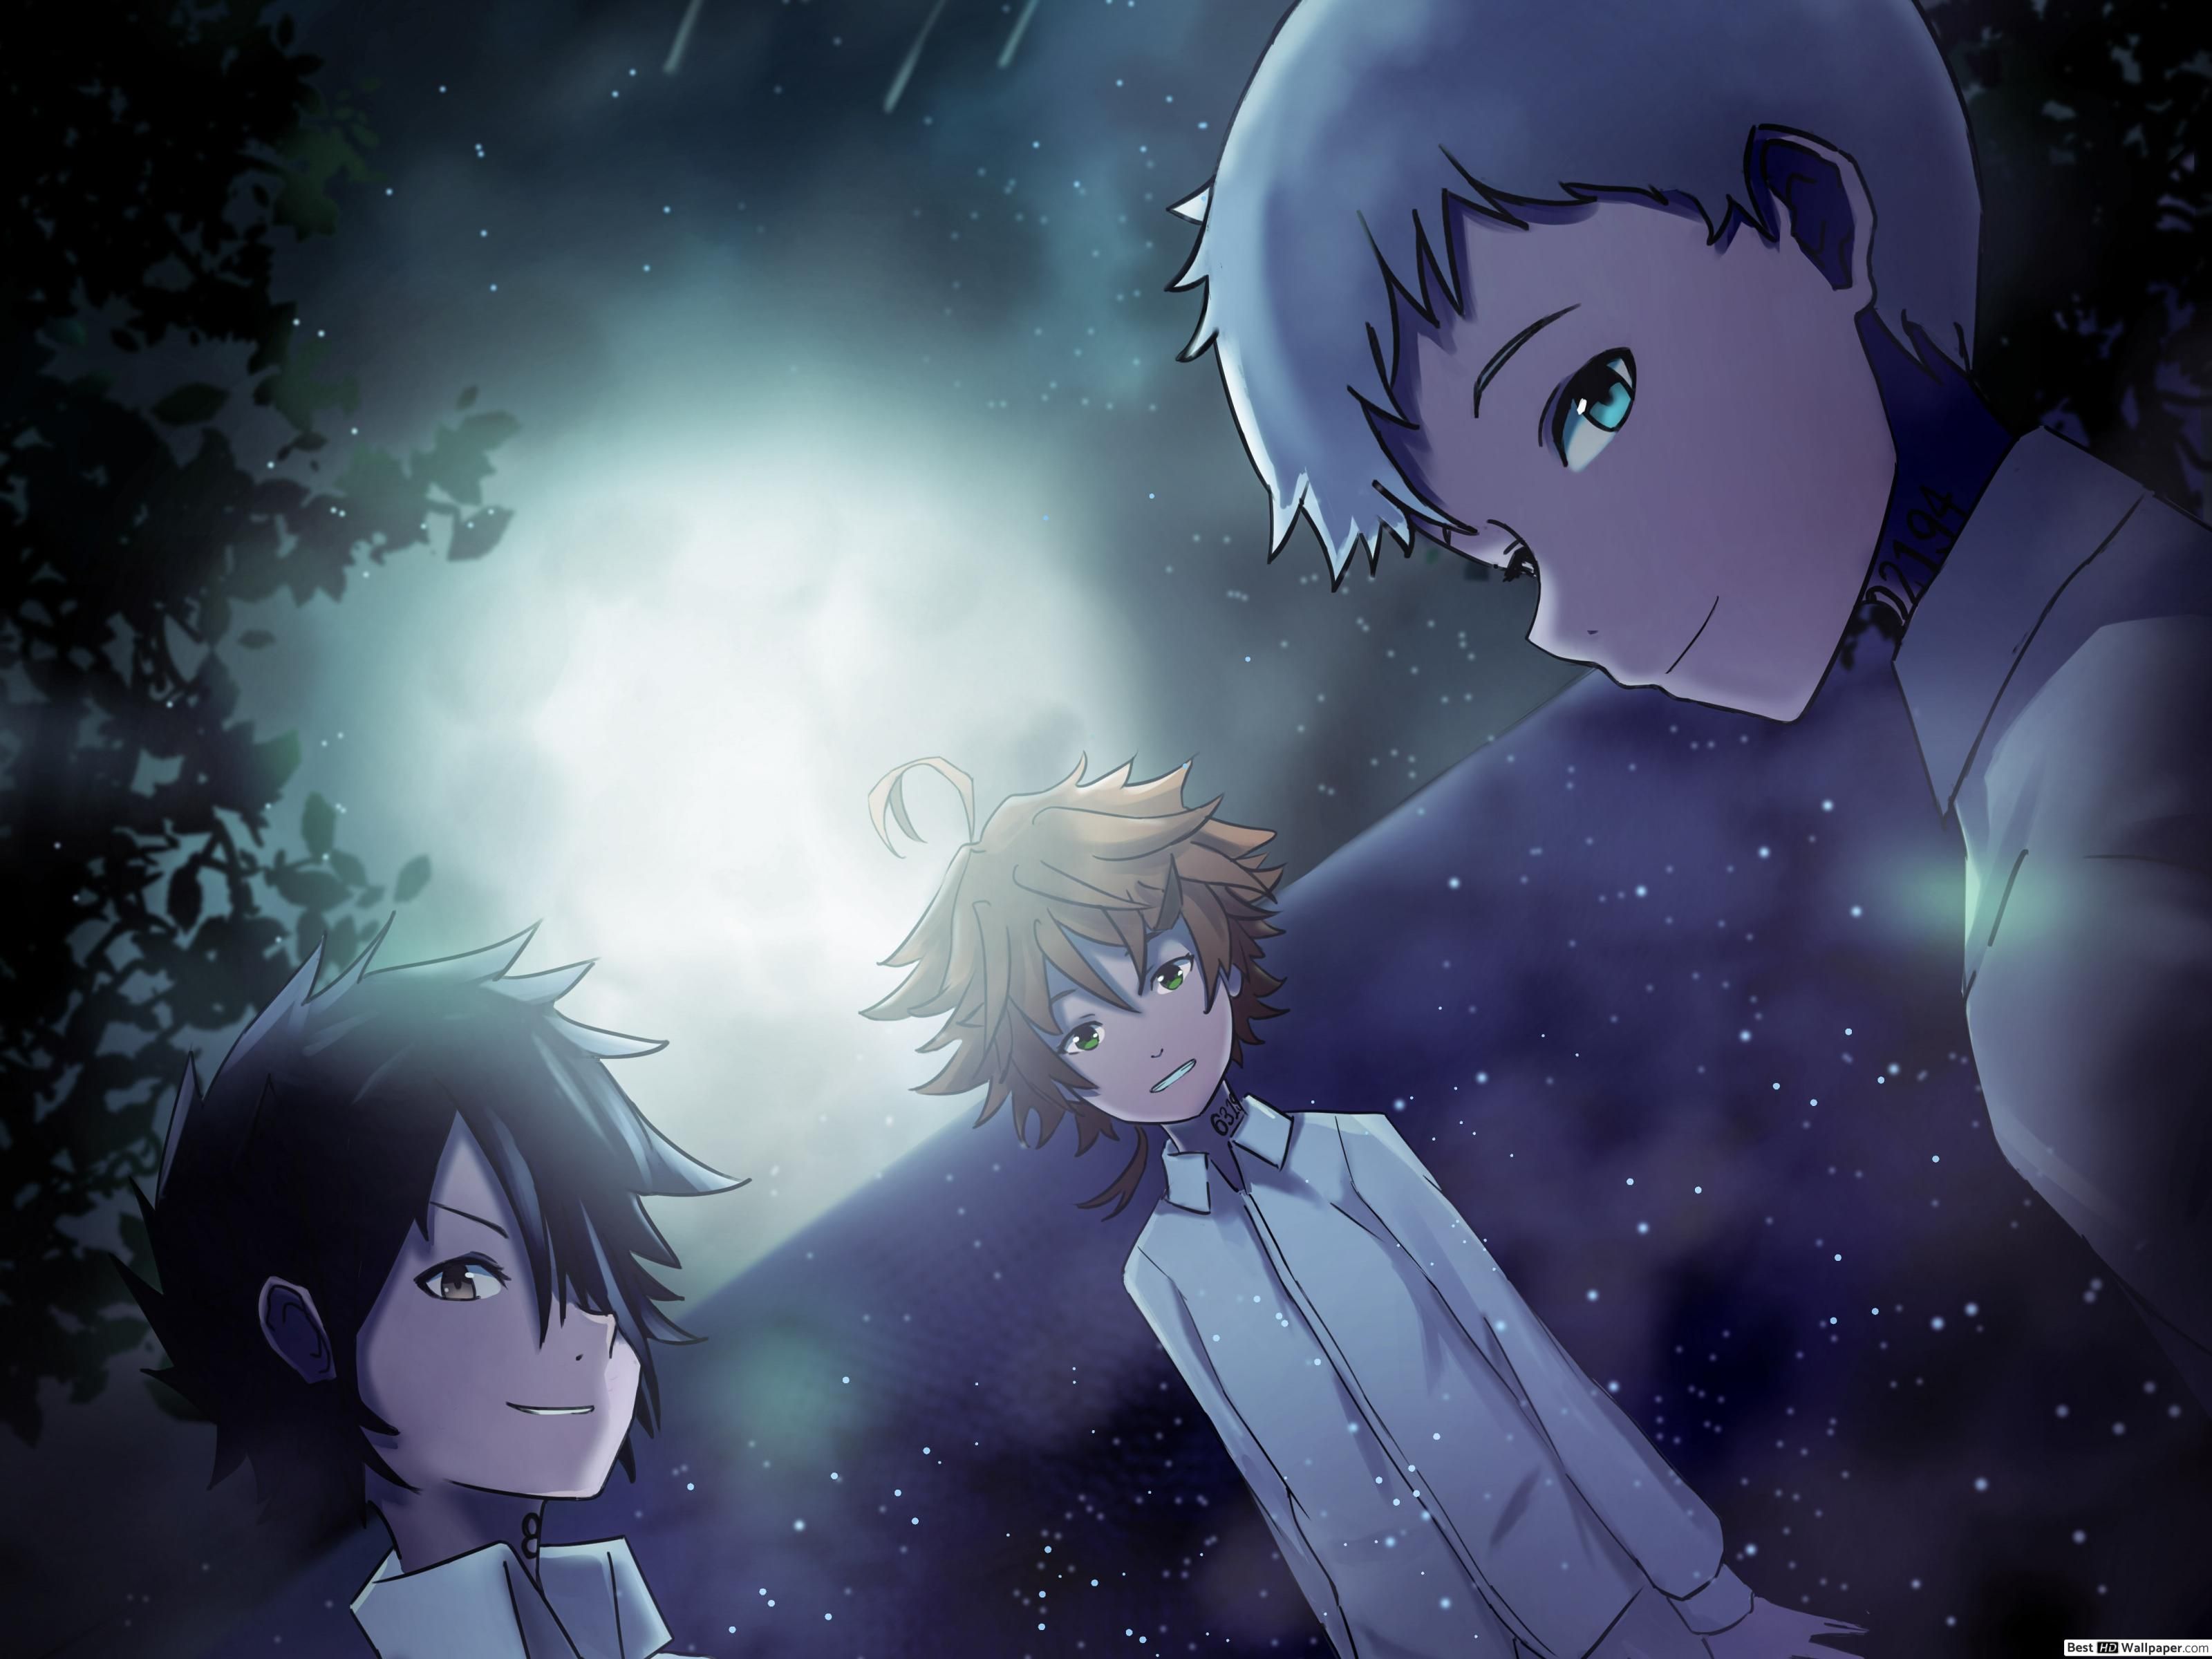 The Promised Neverland Wallpaper .wallpaperaccess.com